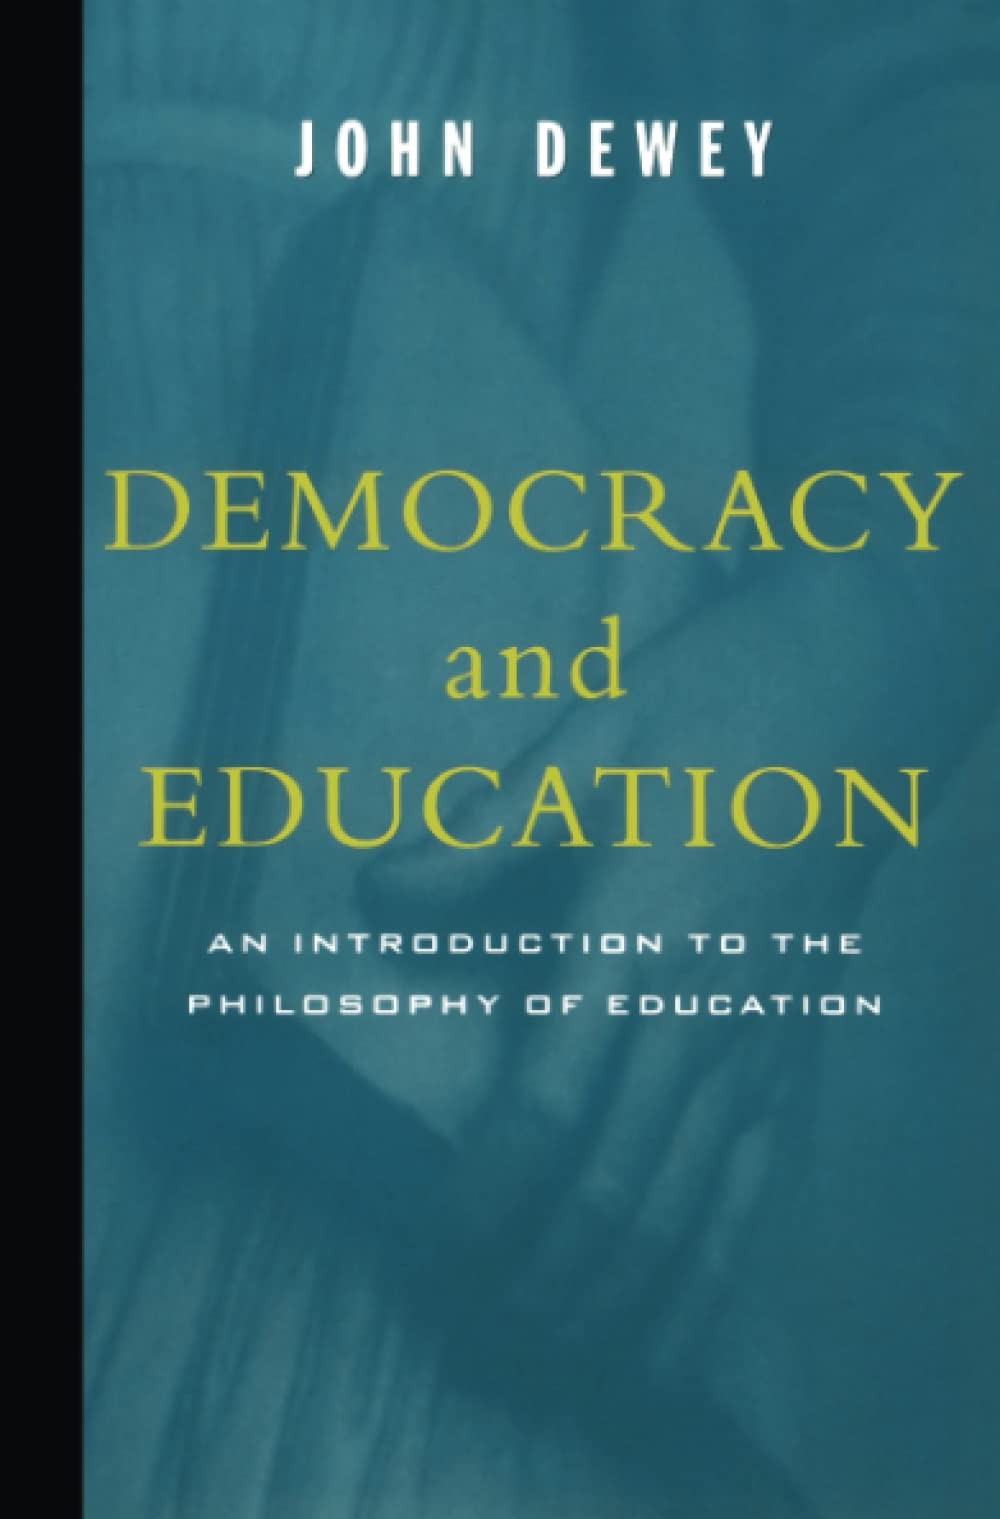 Democracy and Education - Introduction to the Philosophy of Education